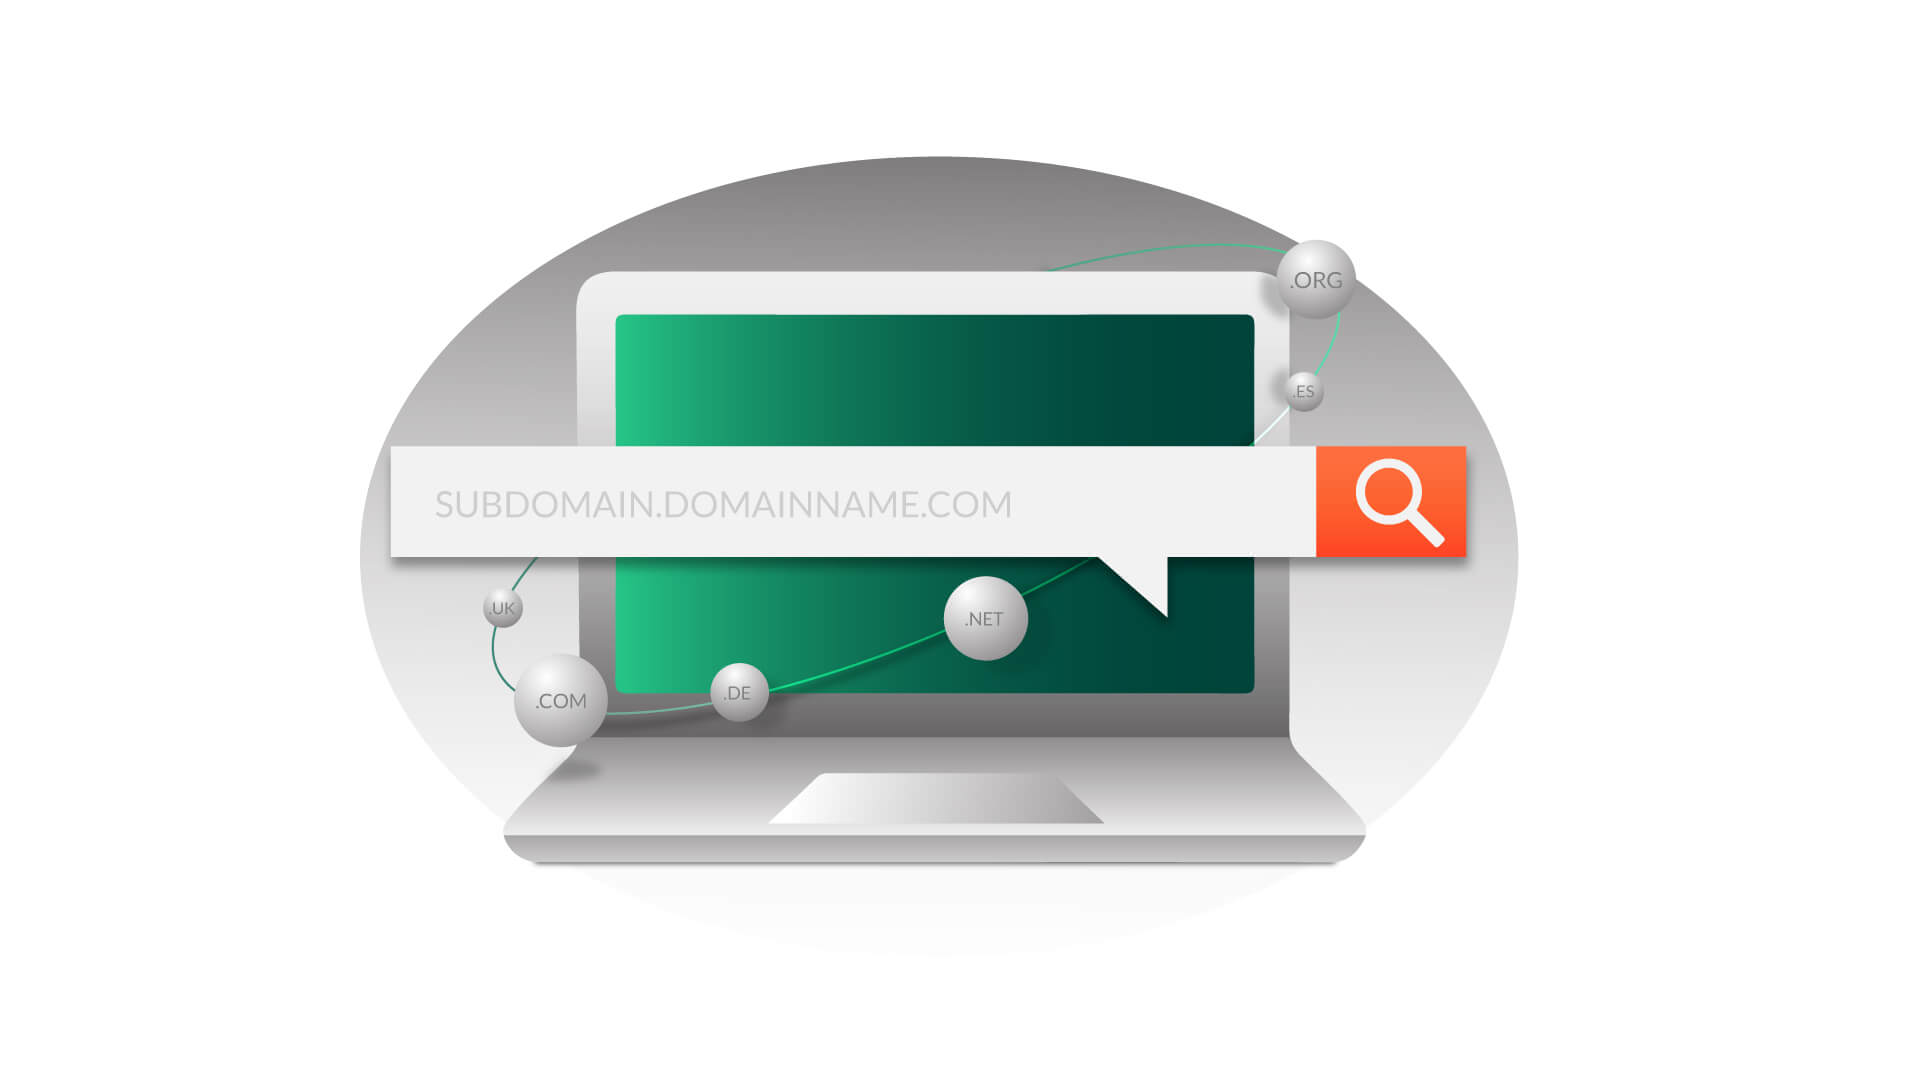 Learn all about what is a subdomain and how to use it